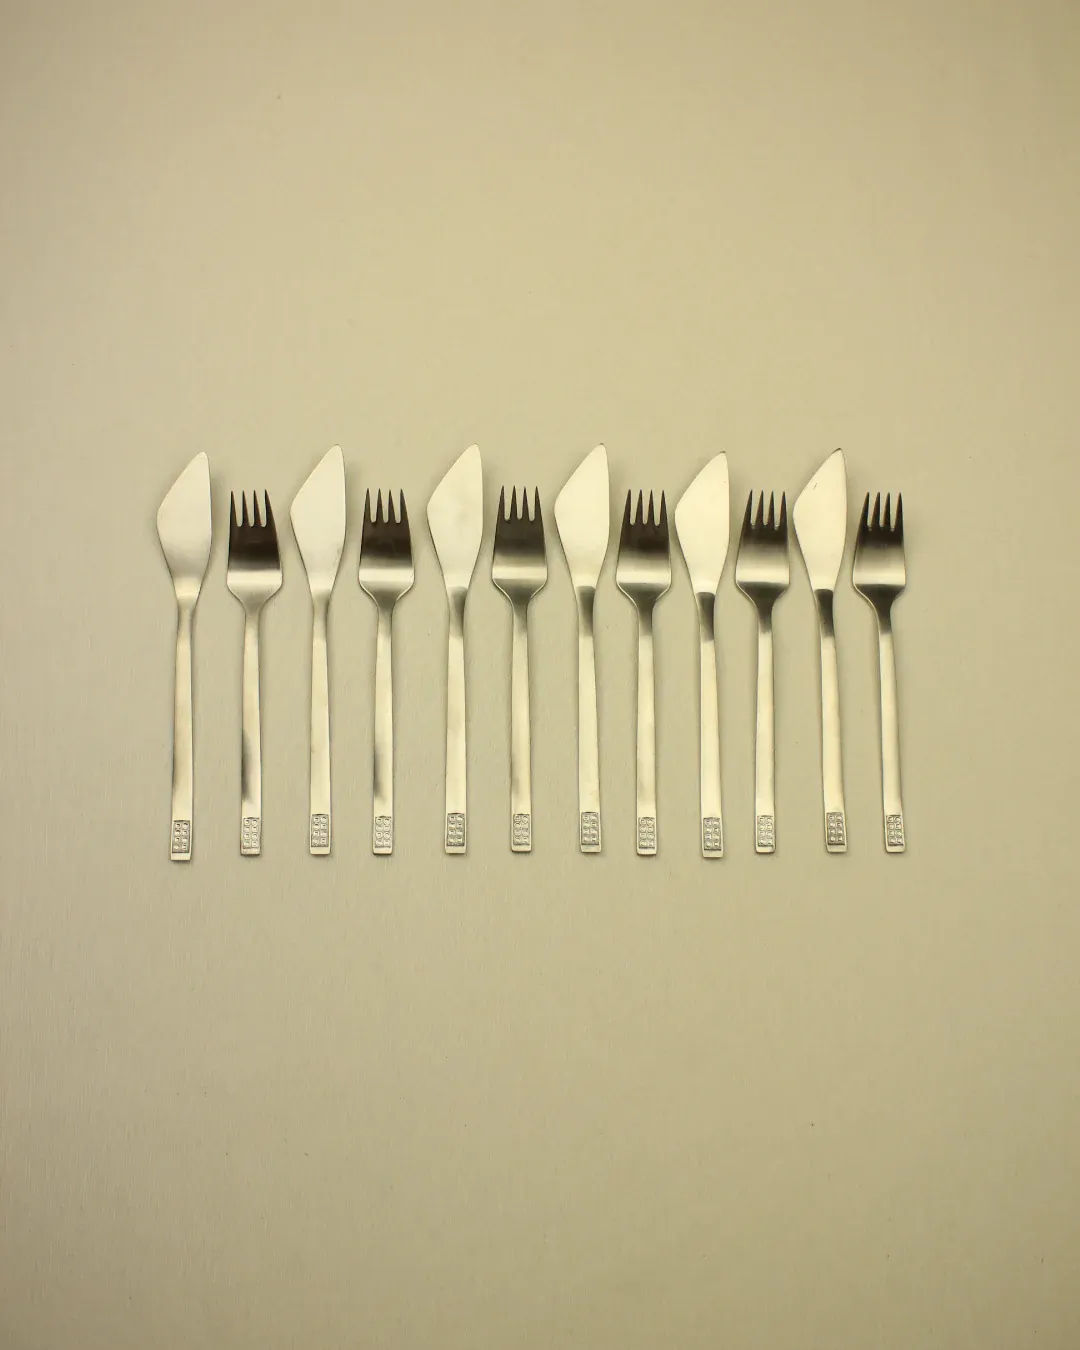 Nine Cutlery Set 70s Style forks with creatively designed cut-outs in their spades are arranged in a horizontal row against a plain beige background, featuring a minimalist design.